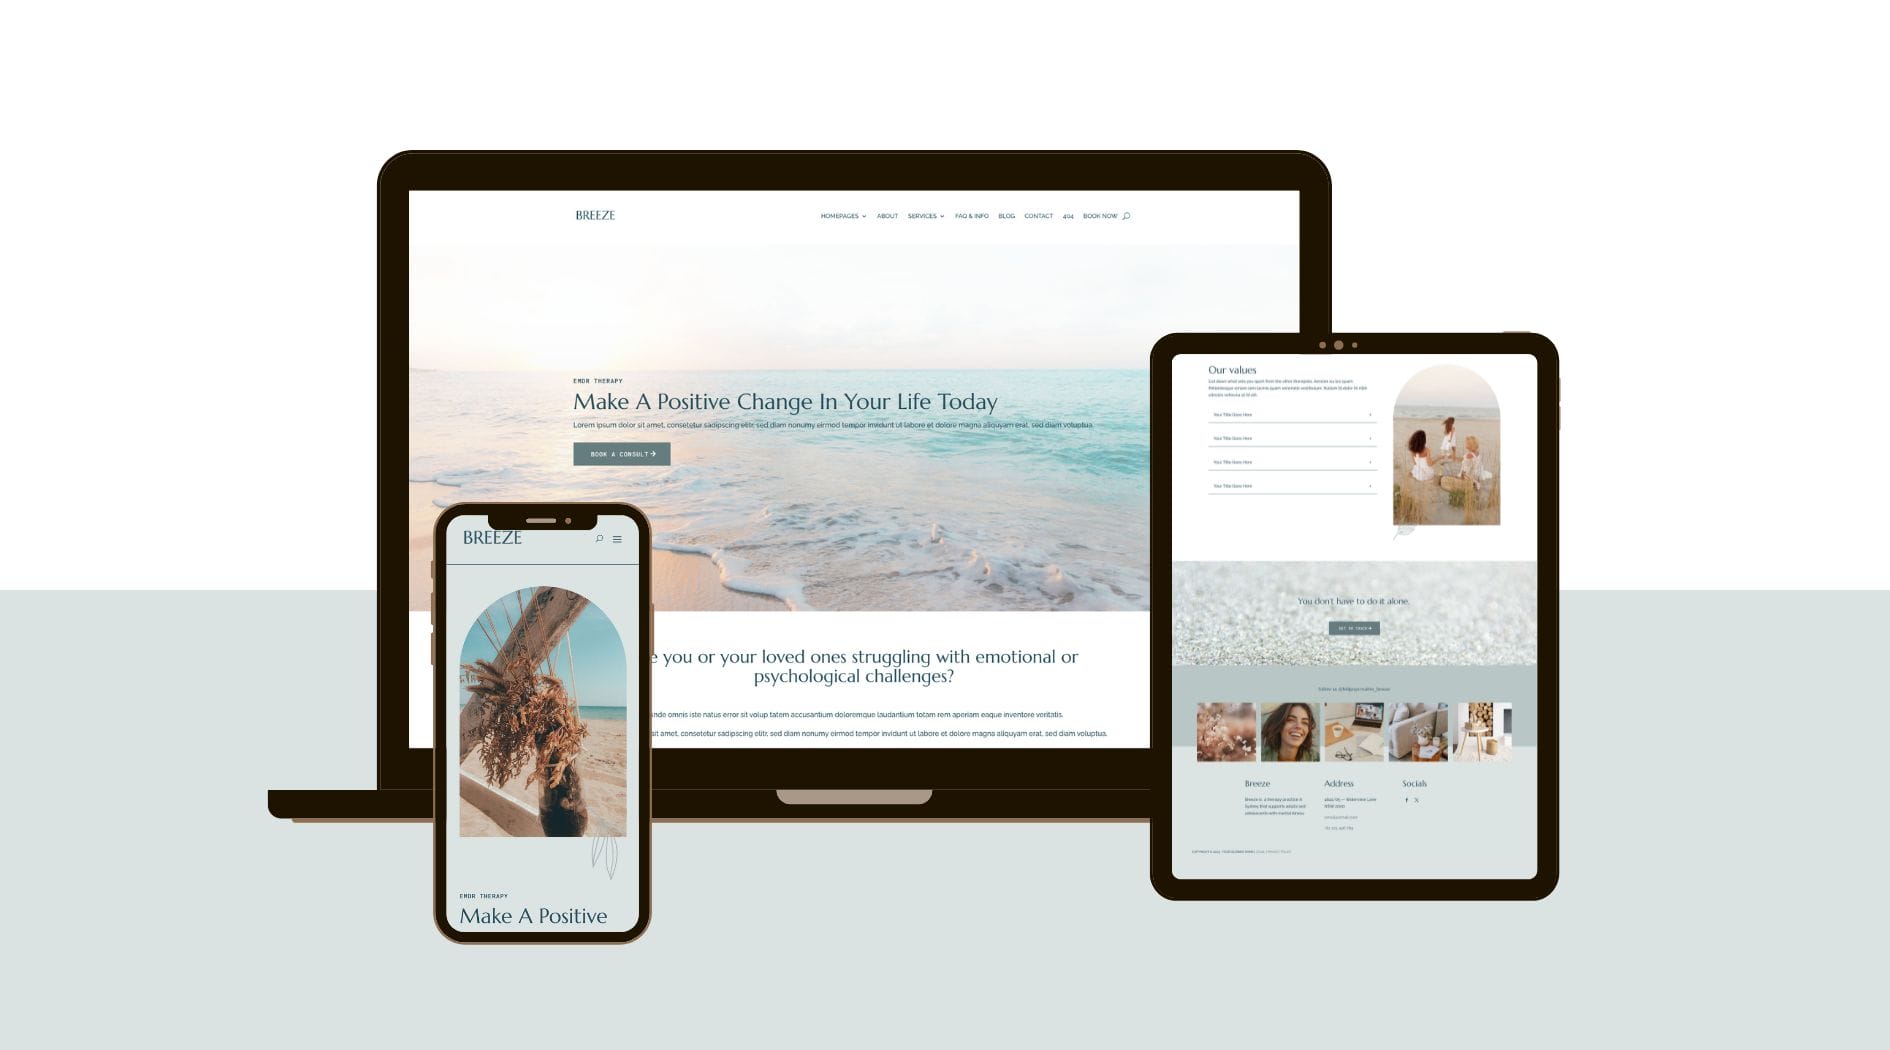 Responsive website design displayed on a desktop monitor, laptop, tablet, and smartphone, featuring calming beach imagery and wellness content.